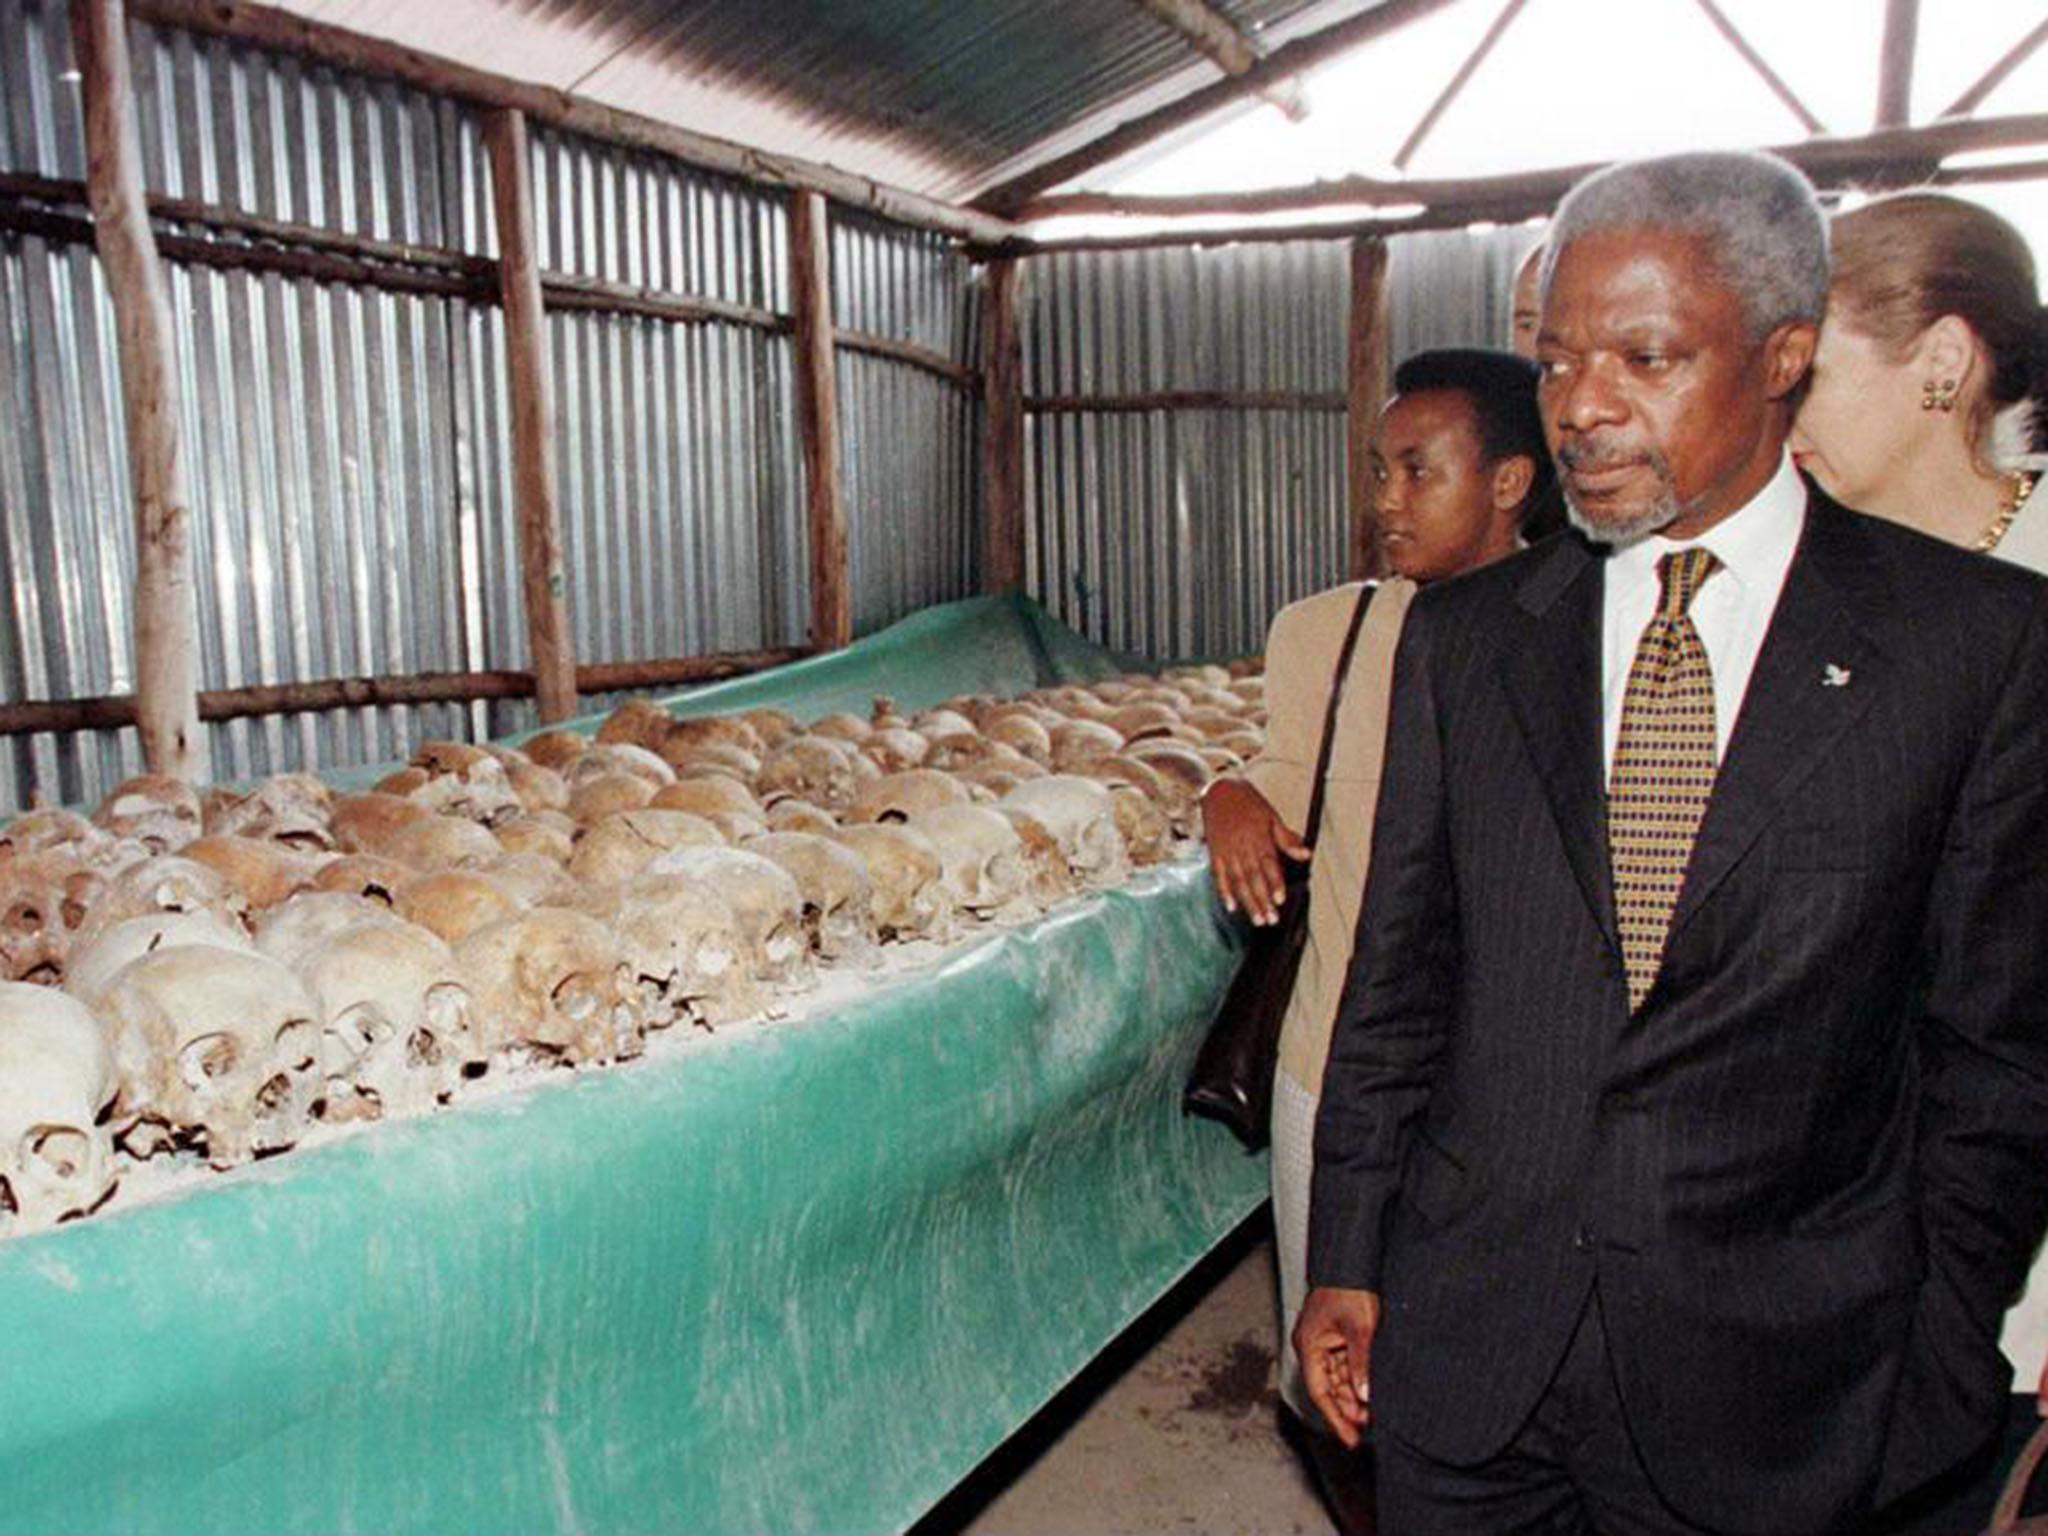 Critics blamed Annan for the UN’s failure to halt the genocide in Rwanda in the 1990s, when he was head of the organisation’s peacekeeping operations